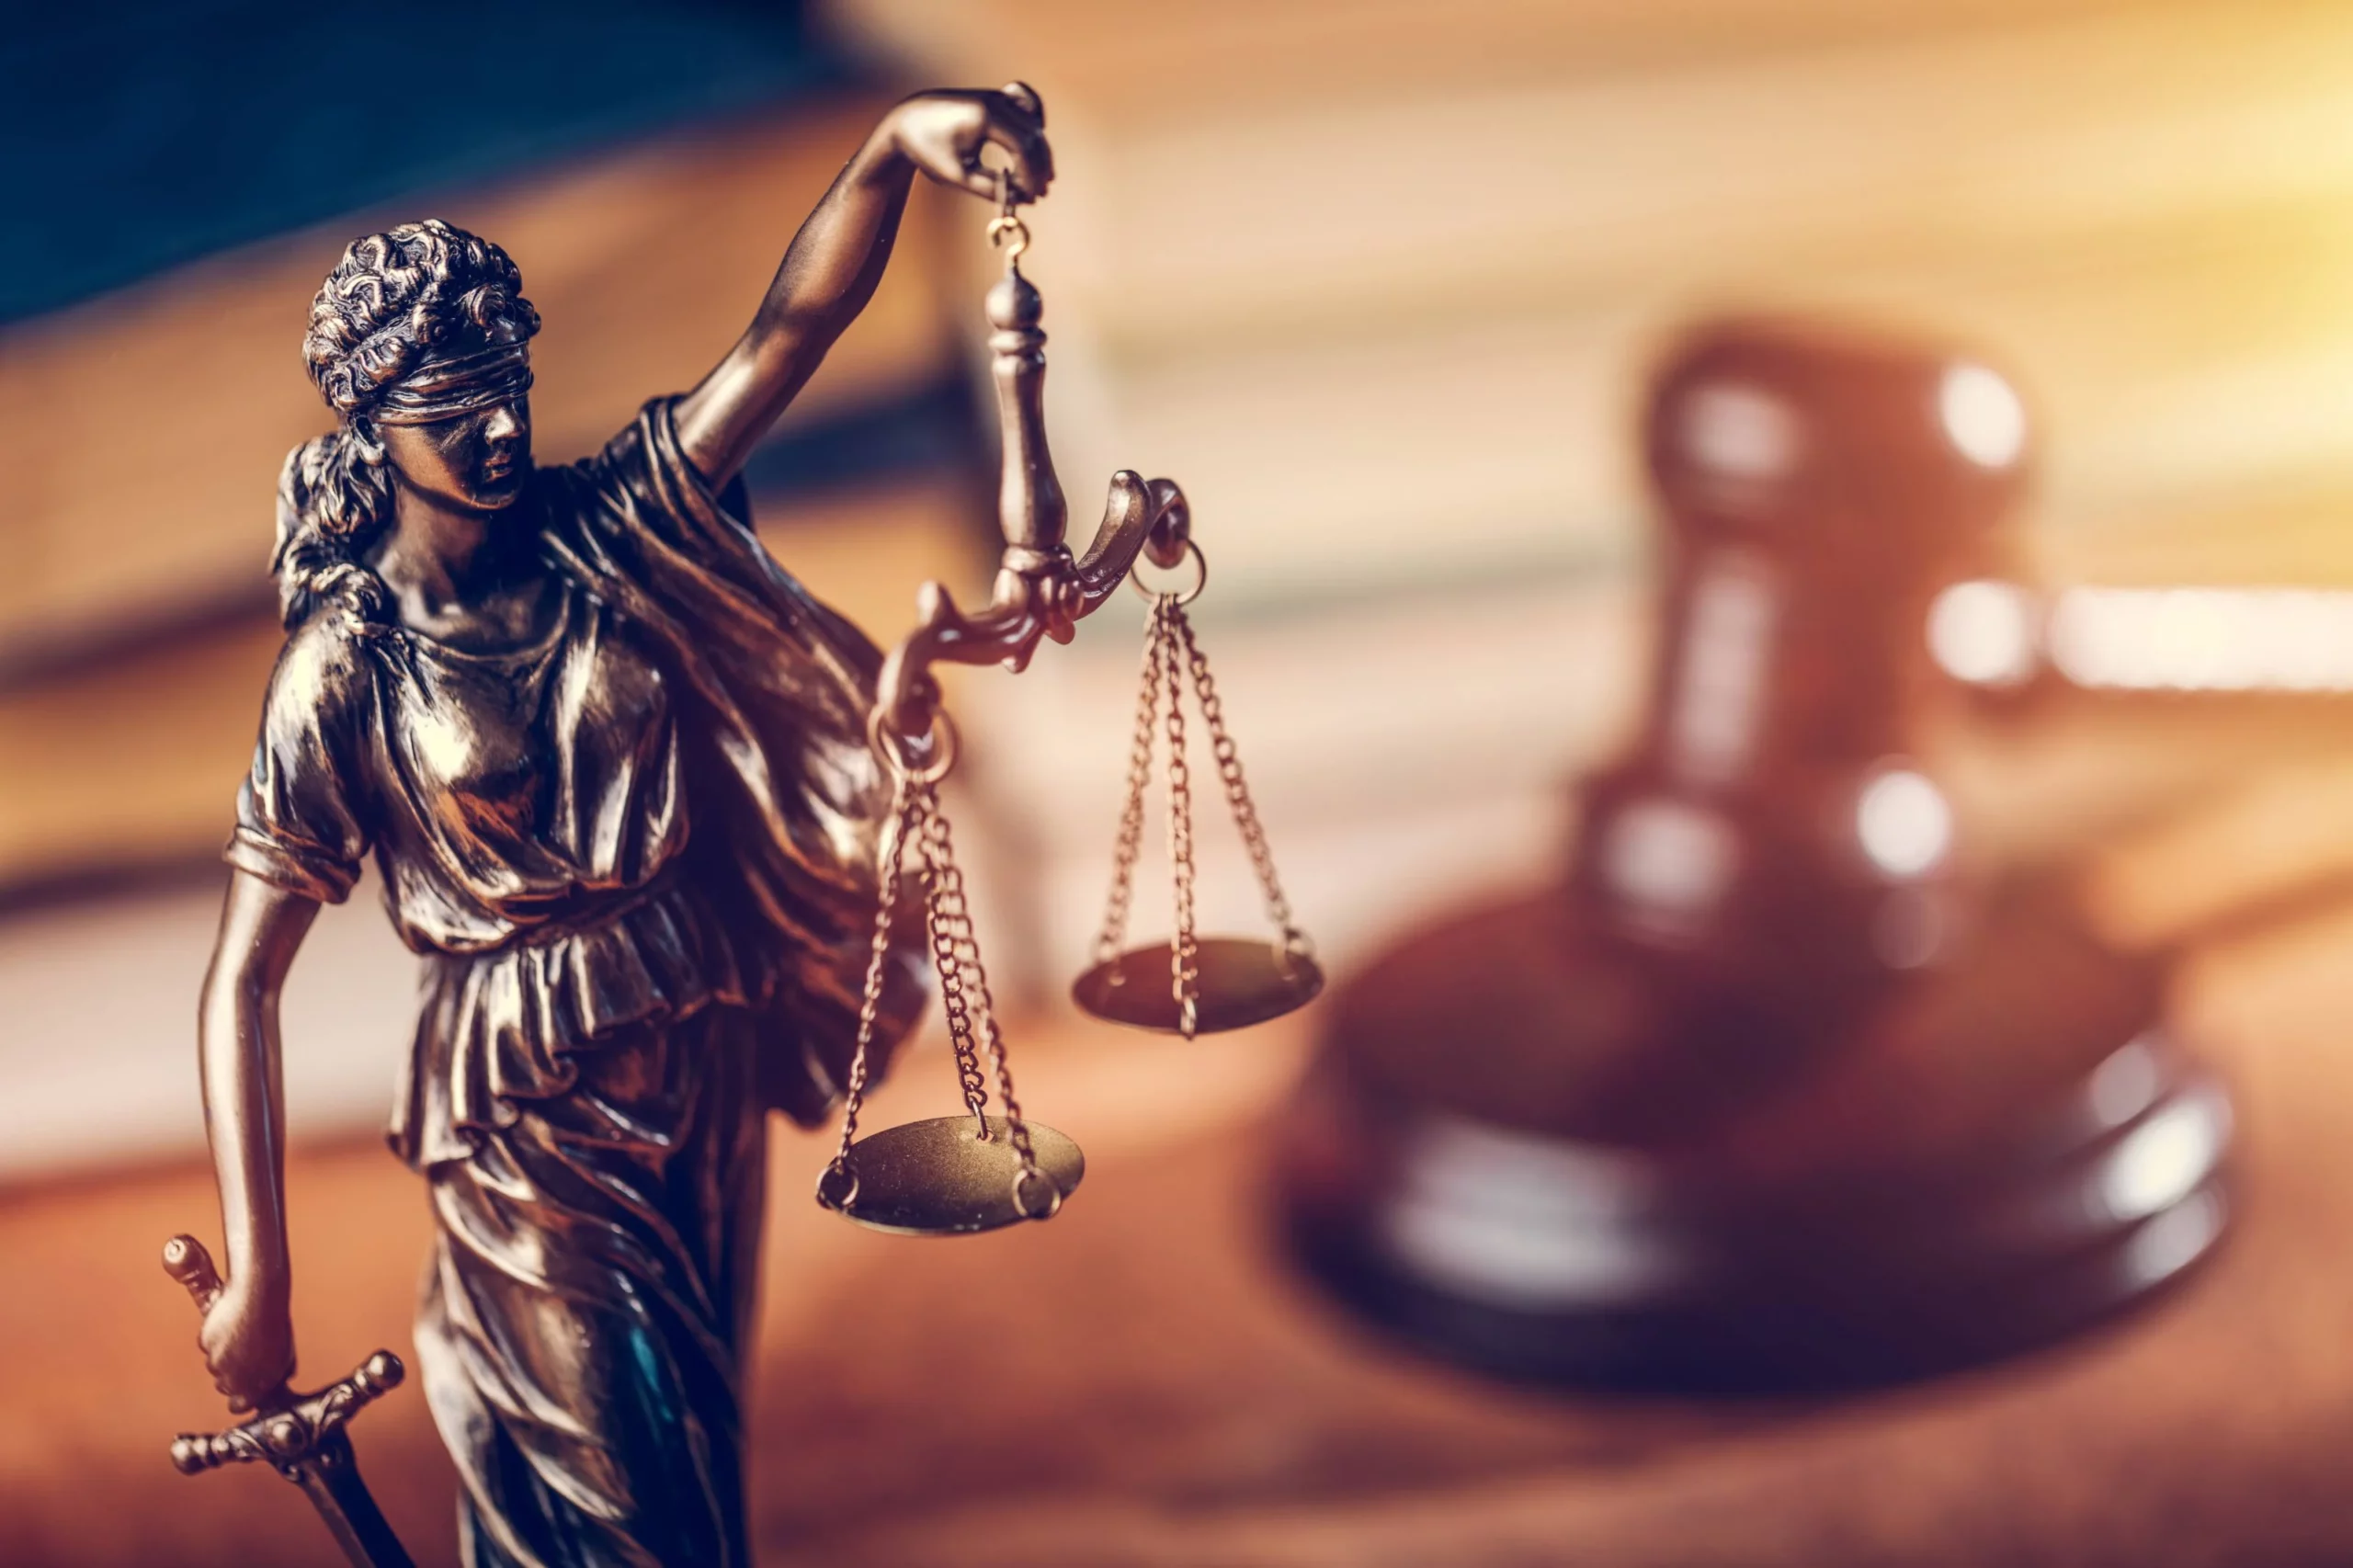 The COVID-19 Surge In Litigation & How It's Impacting Small Businesses?